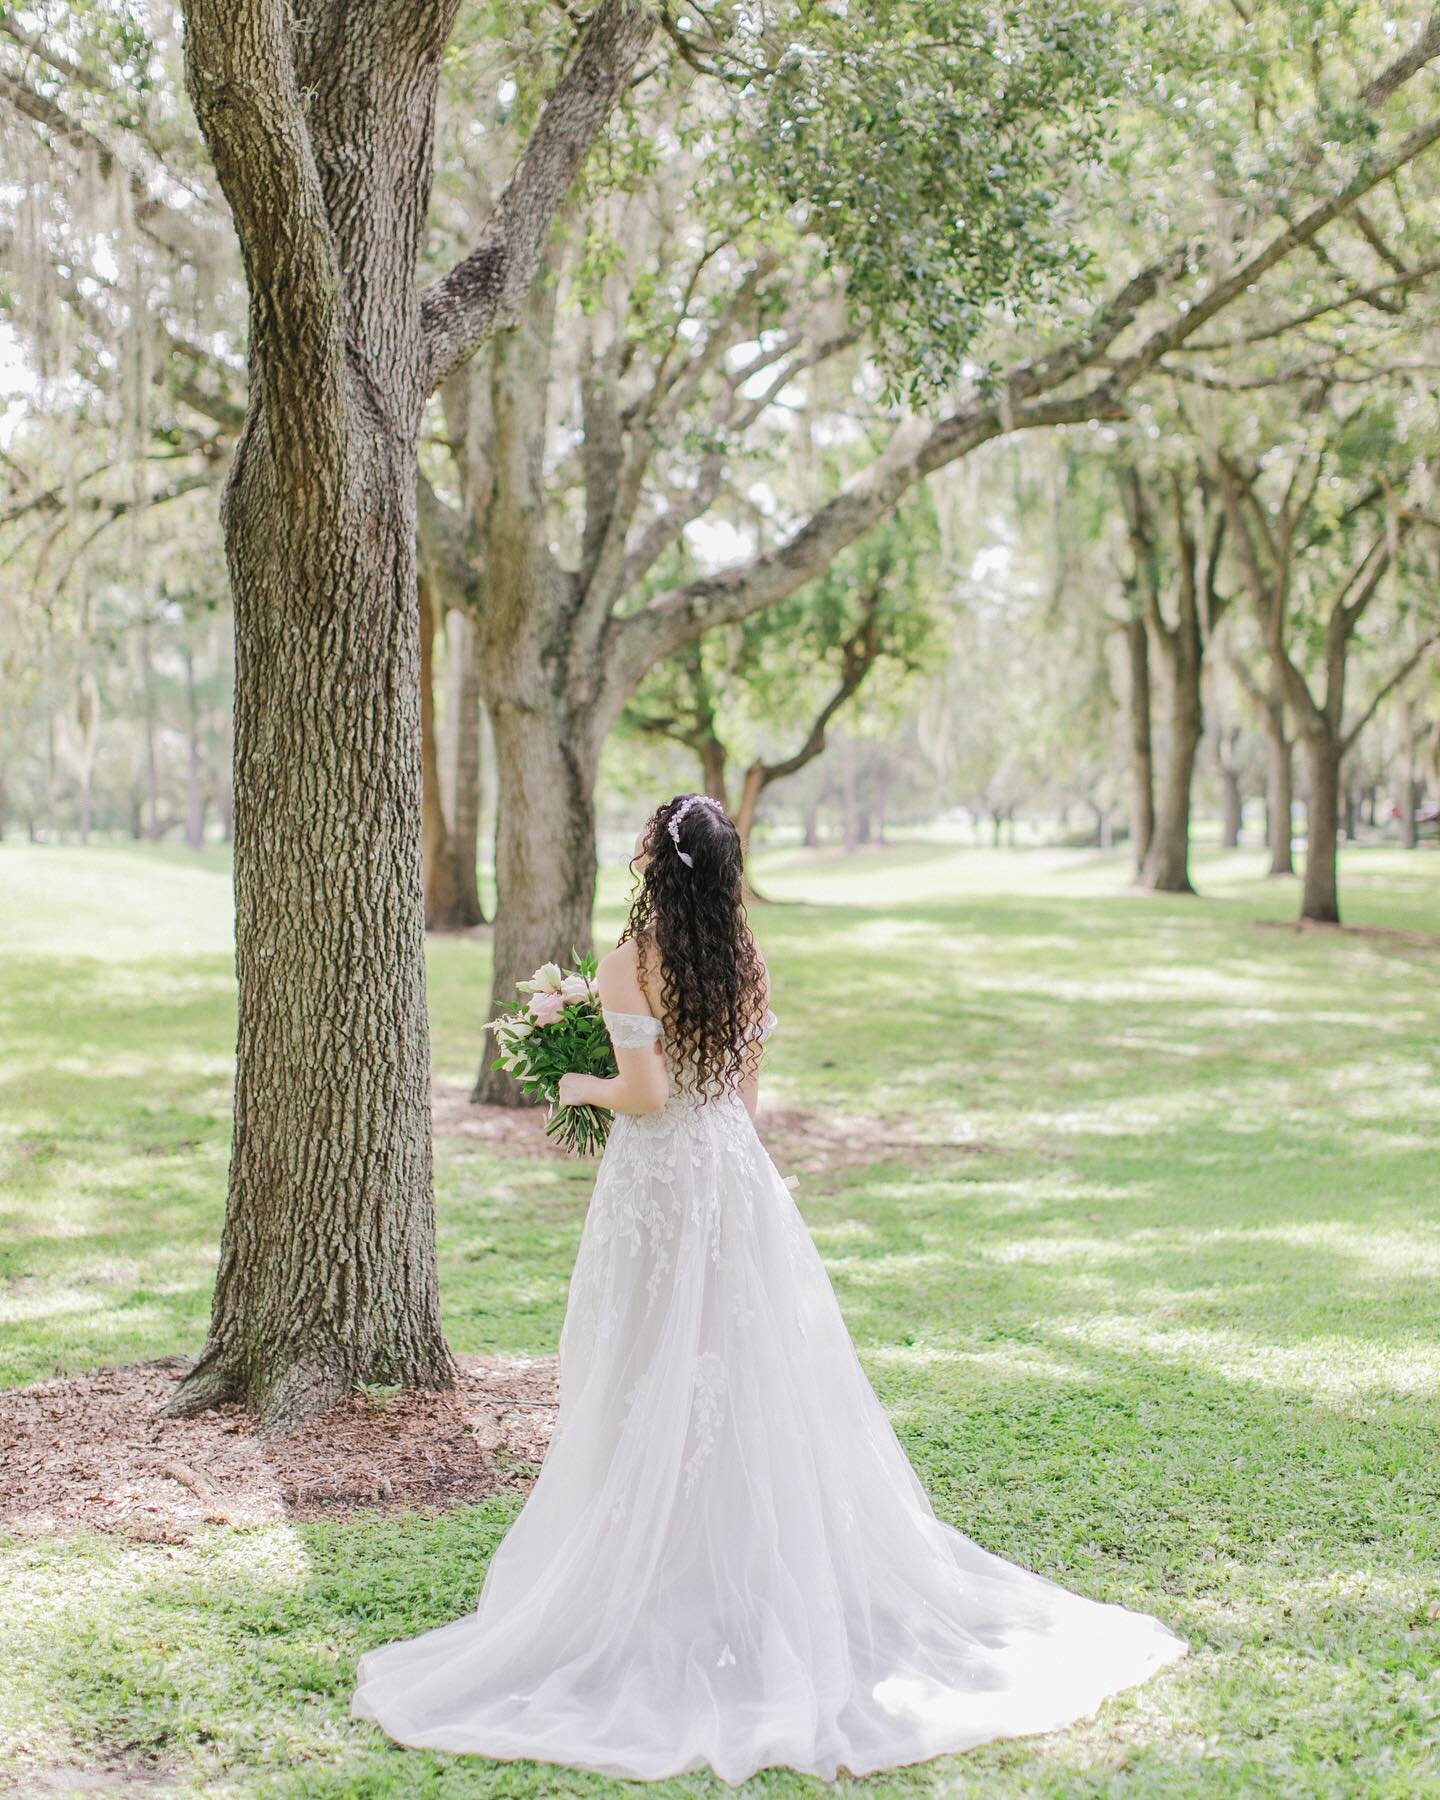 @katiaduff just being a casual forest fairy on her wedding day 😍 @cypressgroveestatehouse